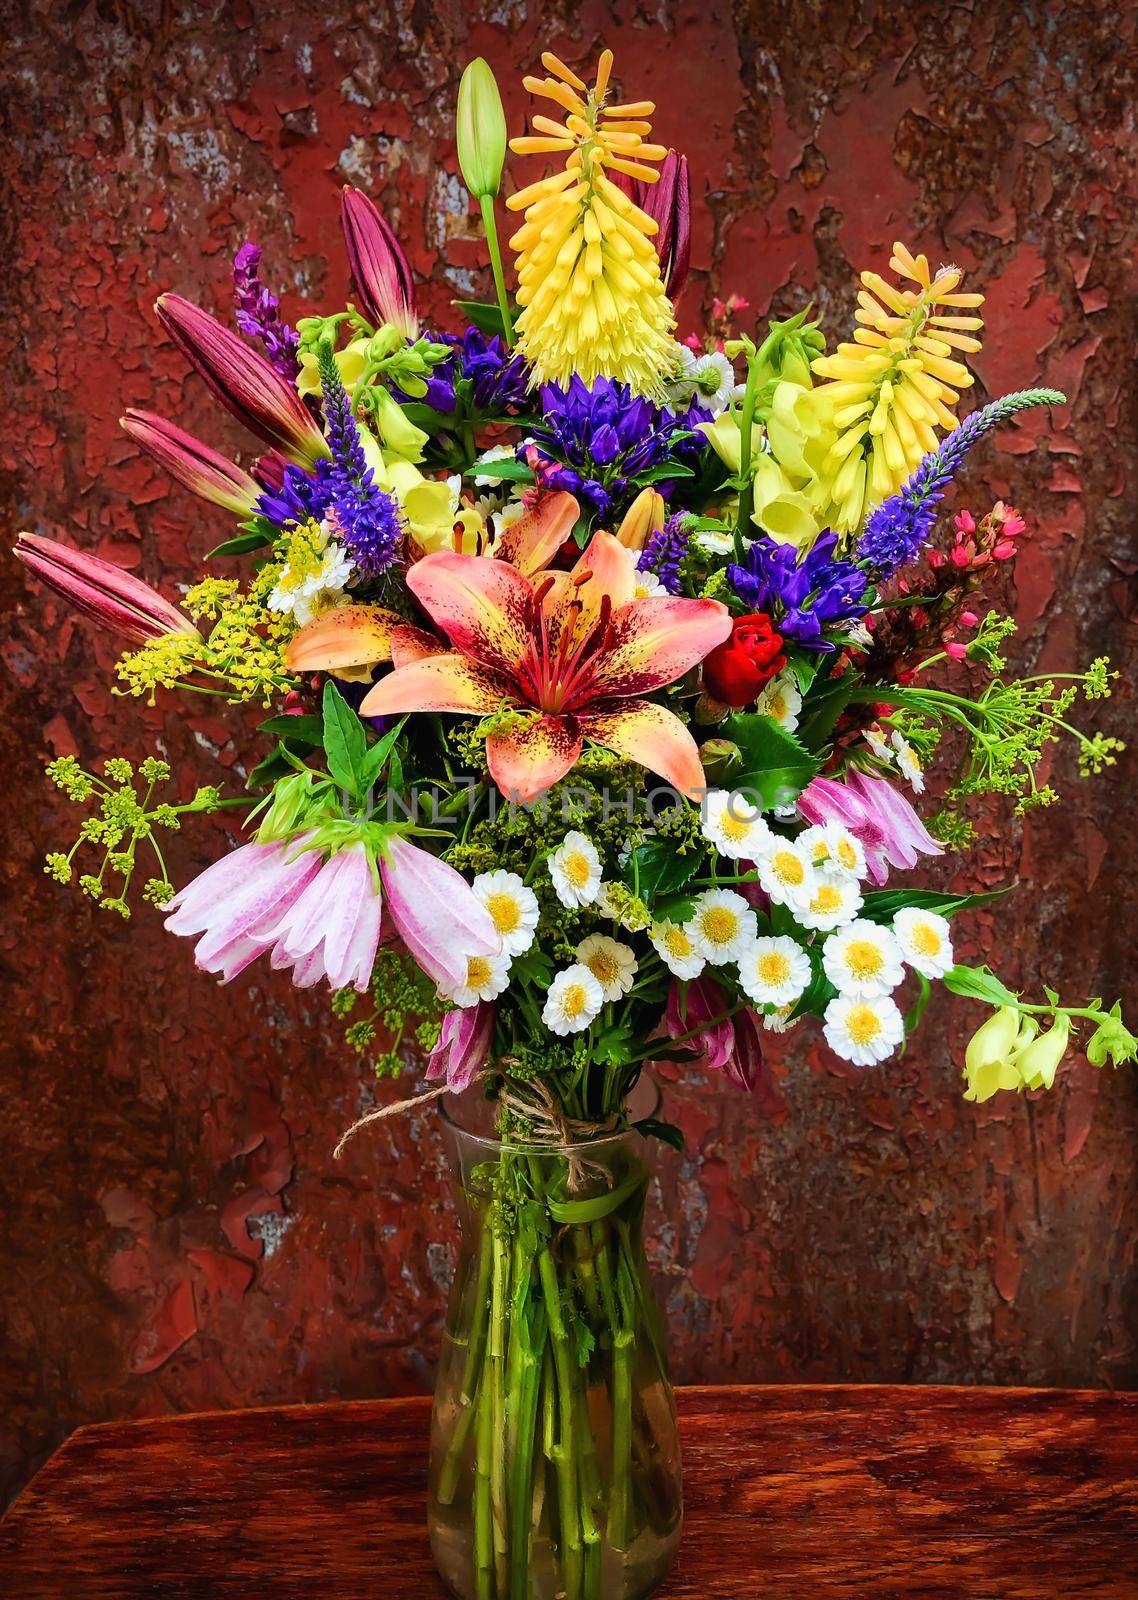 Romantic bouquet of flowers from the countryside by palinchak